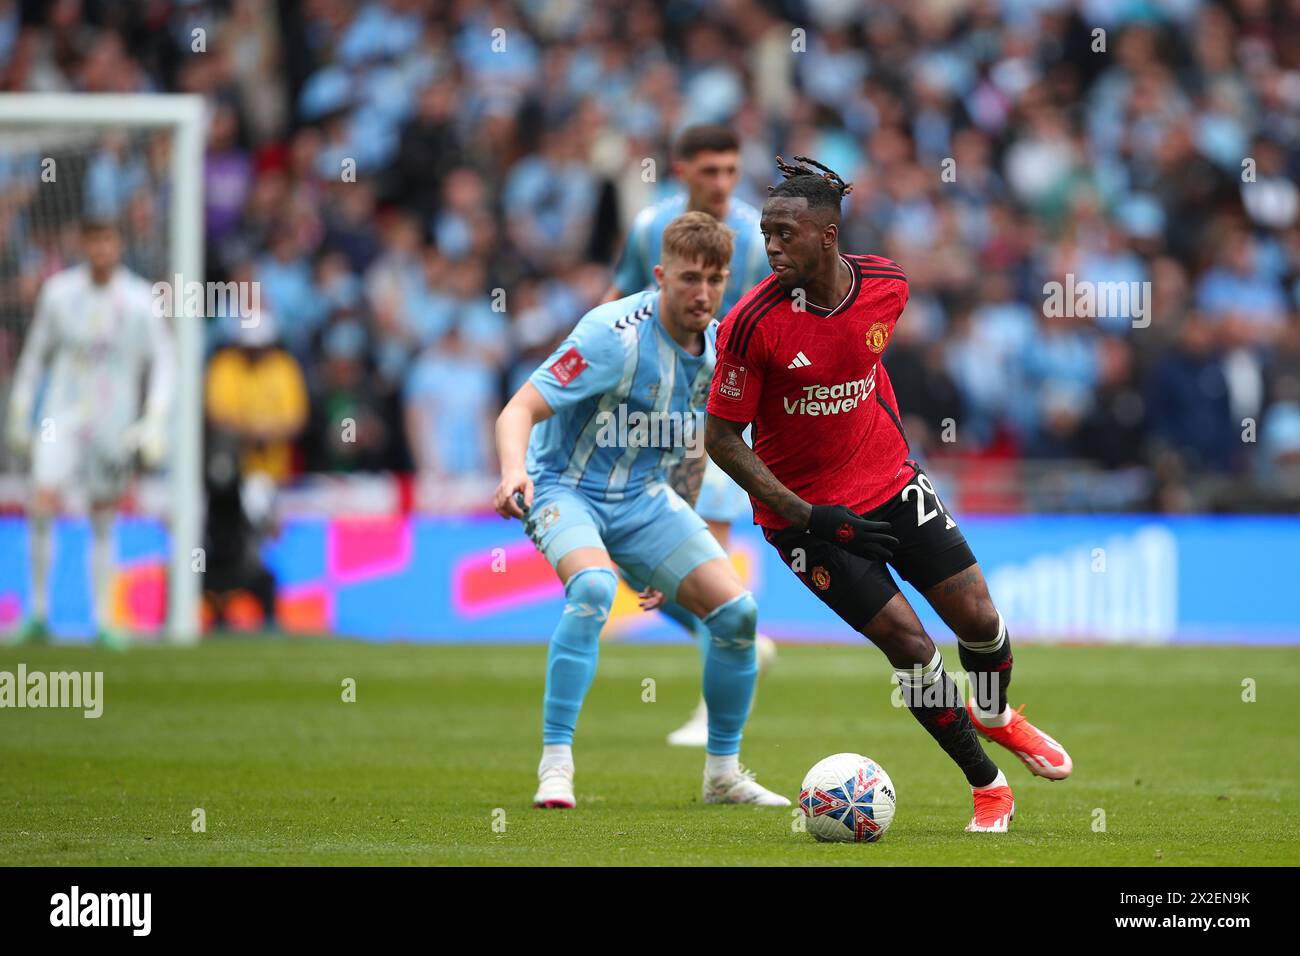 Aaron Wan-Bissaka of Manchester United and Josh Eccles of Coventry City - Coventry City v Manchester United, The Emirates FA Cup Semi Final, Wembley Stadium, London, UK - 21st April 2024 Stock Photo